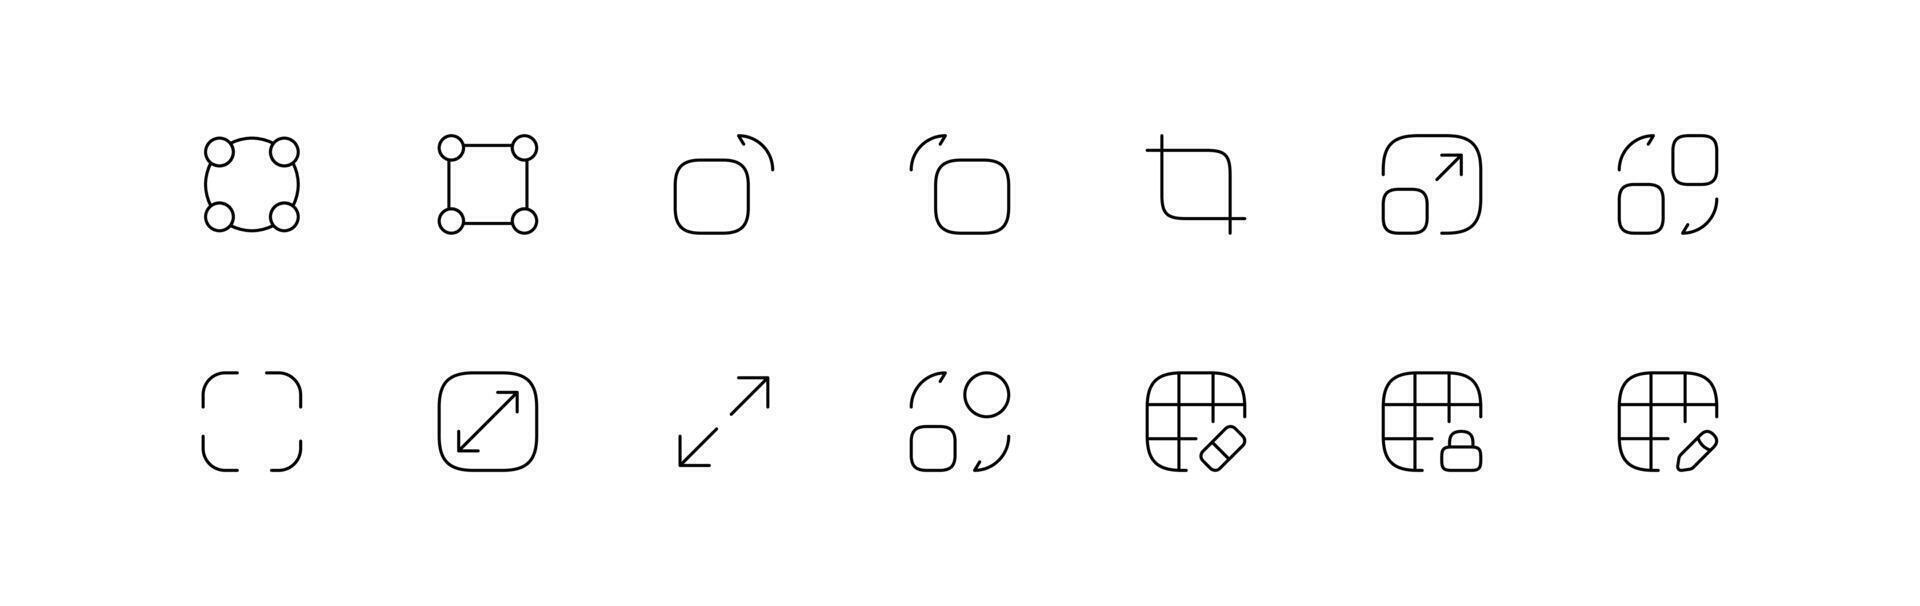 grids icon in different style vector illustration.